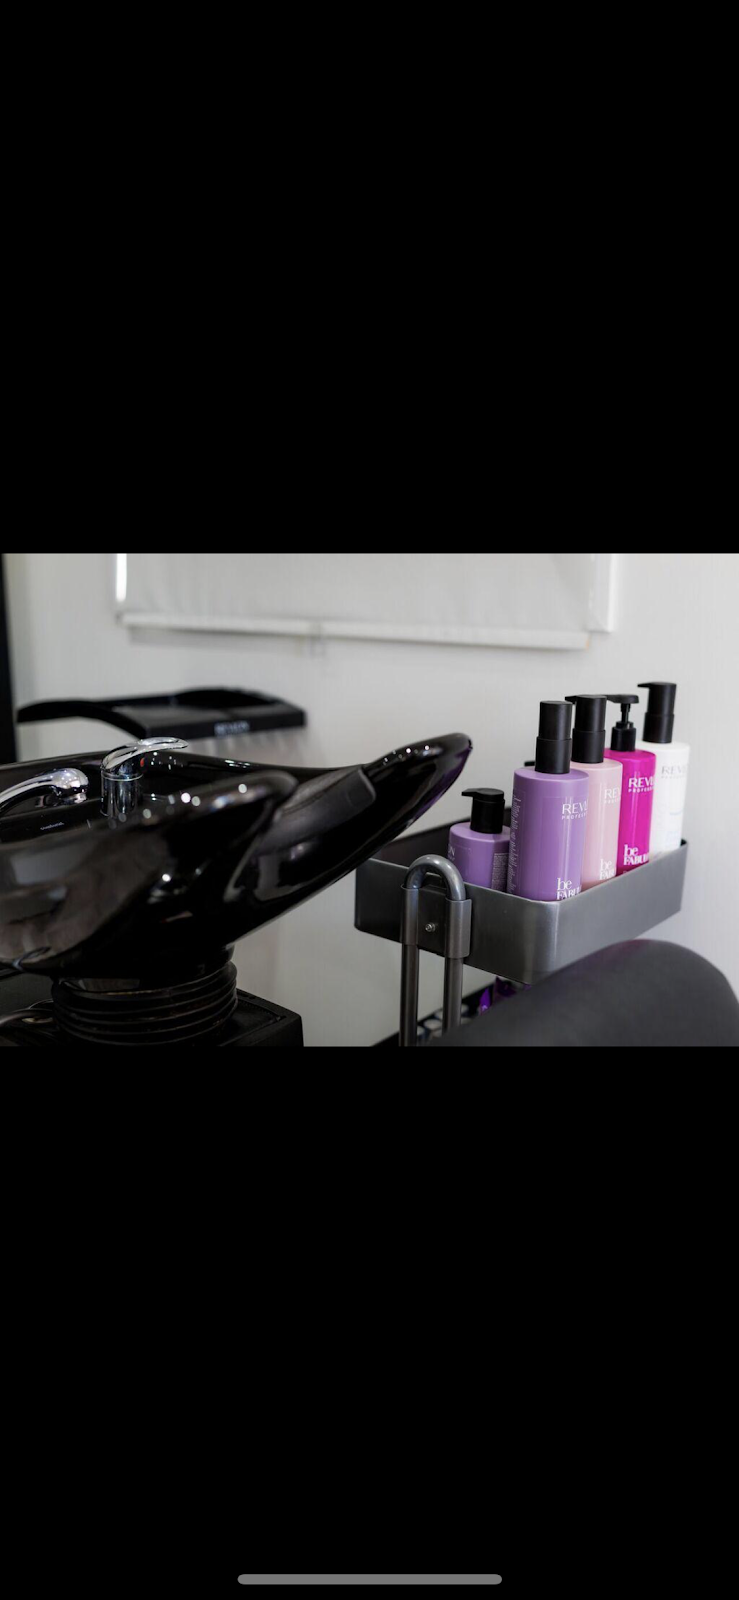 Zera Hair and Care | hair care | 64 Valentia St, Mansfield QLD 4122, Australia | 0406673732 OR +61 406 673 732